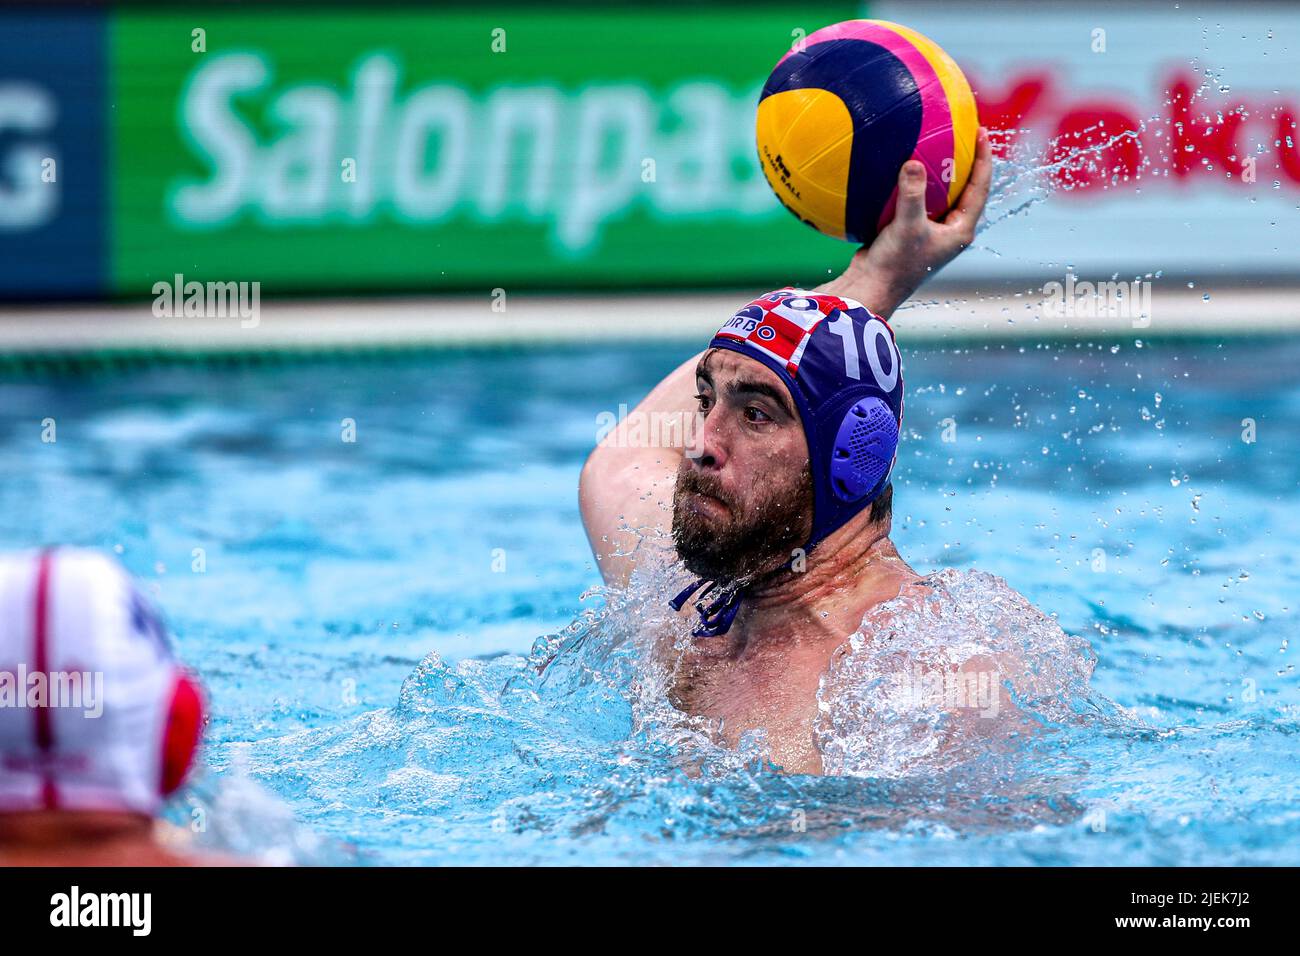 BUDAPEST, HUNGARY - JUNE 27: Josip Vrlic of Croatia during the FINA World Championships Budapest 2022 1/8 finals match between Georgia and Croatia on June 27, 2022 in Budapest, Hungary (Photo by Albert ten Hove/Orange Pictures) Stock Photo